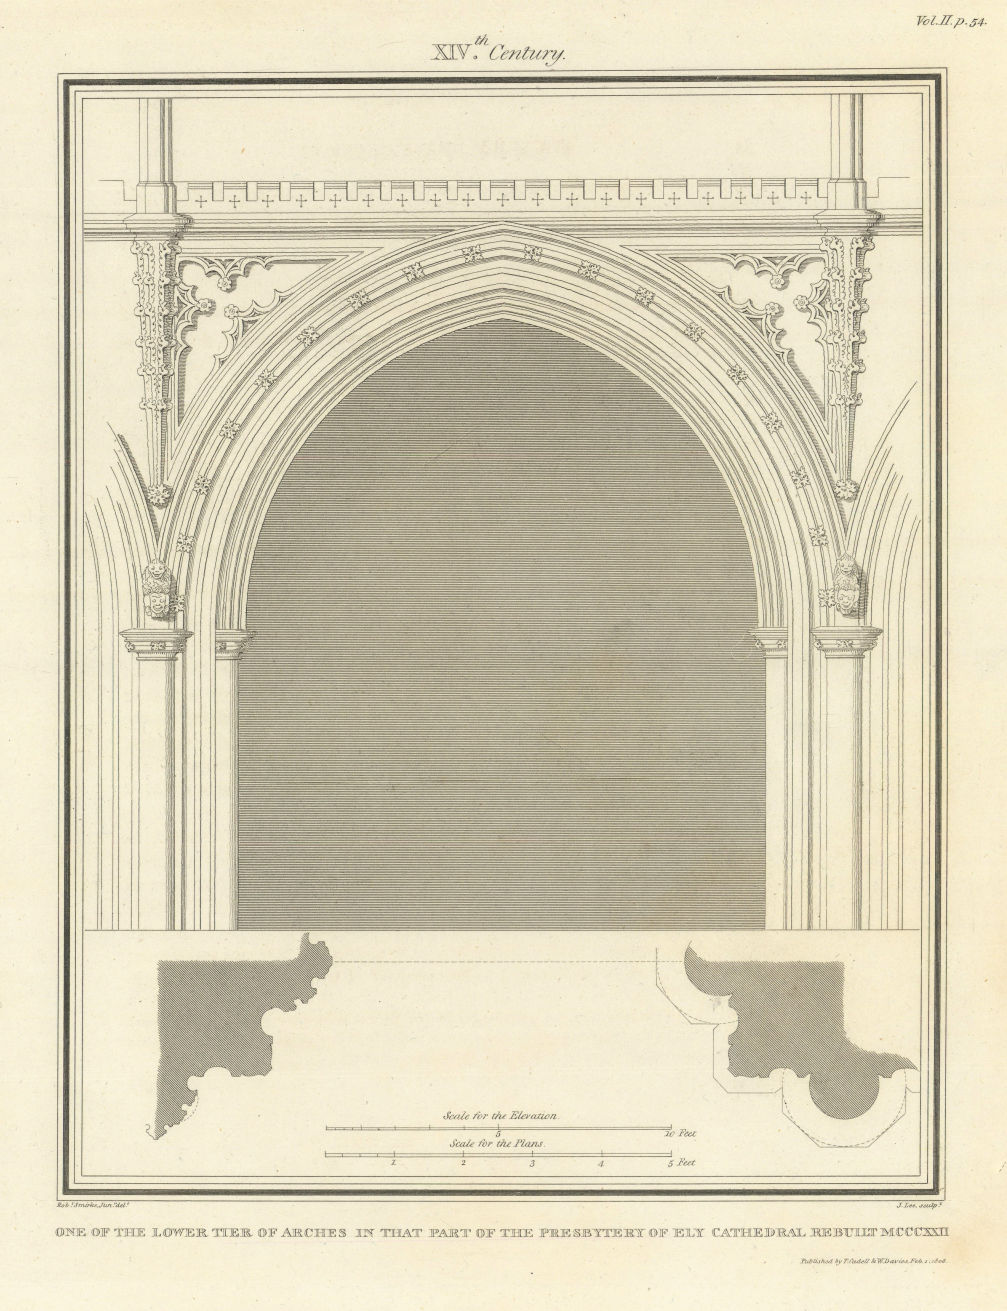 Associate Product One of the lower tier of arches in the Presbytery of Ely Cathedral. SMIRKE 1810